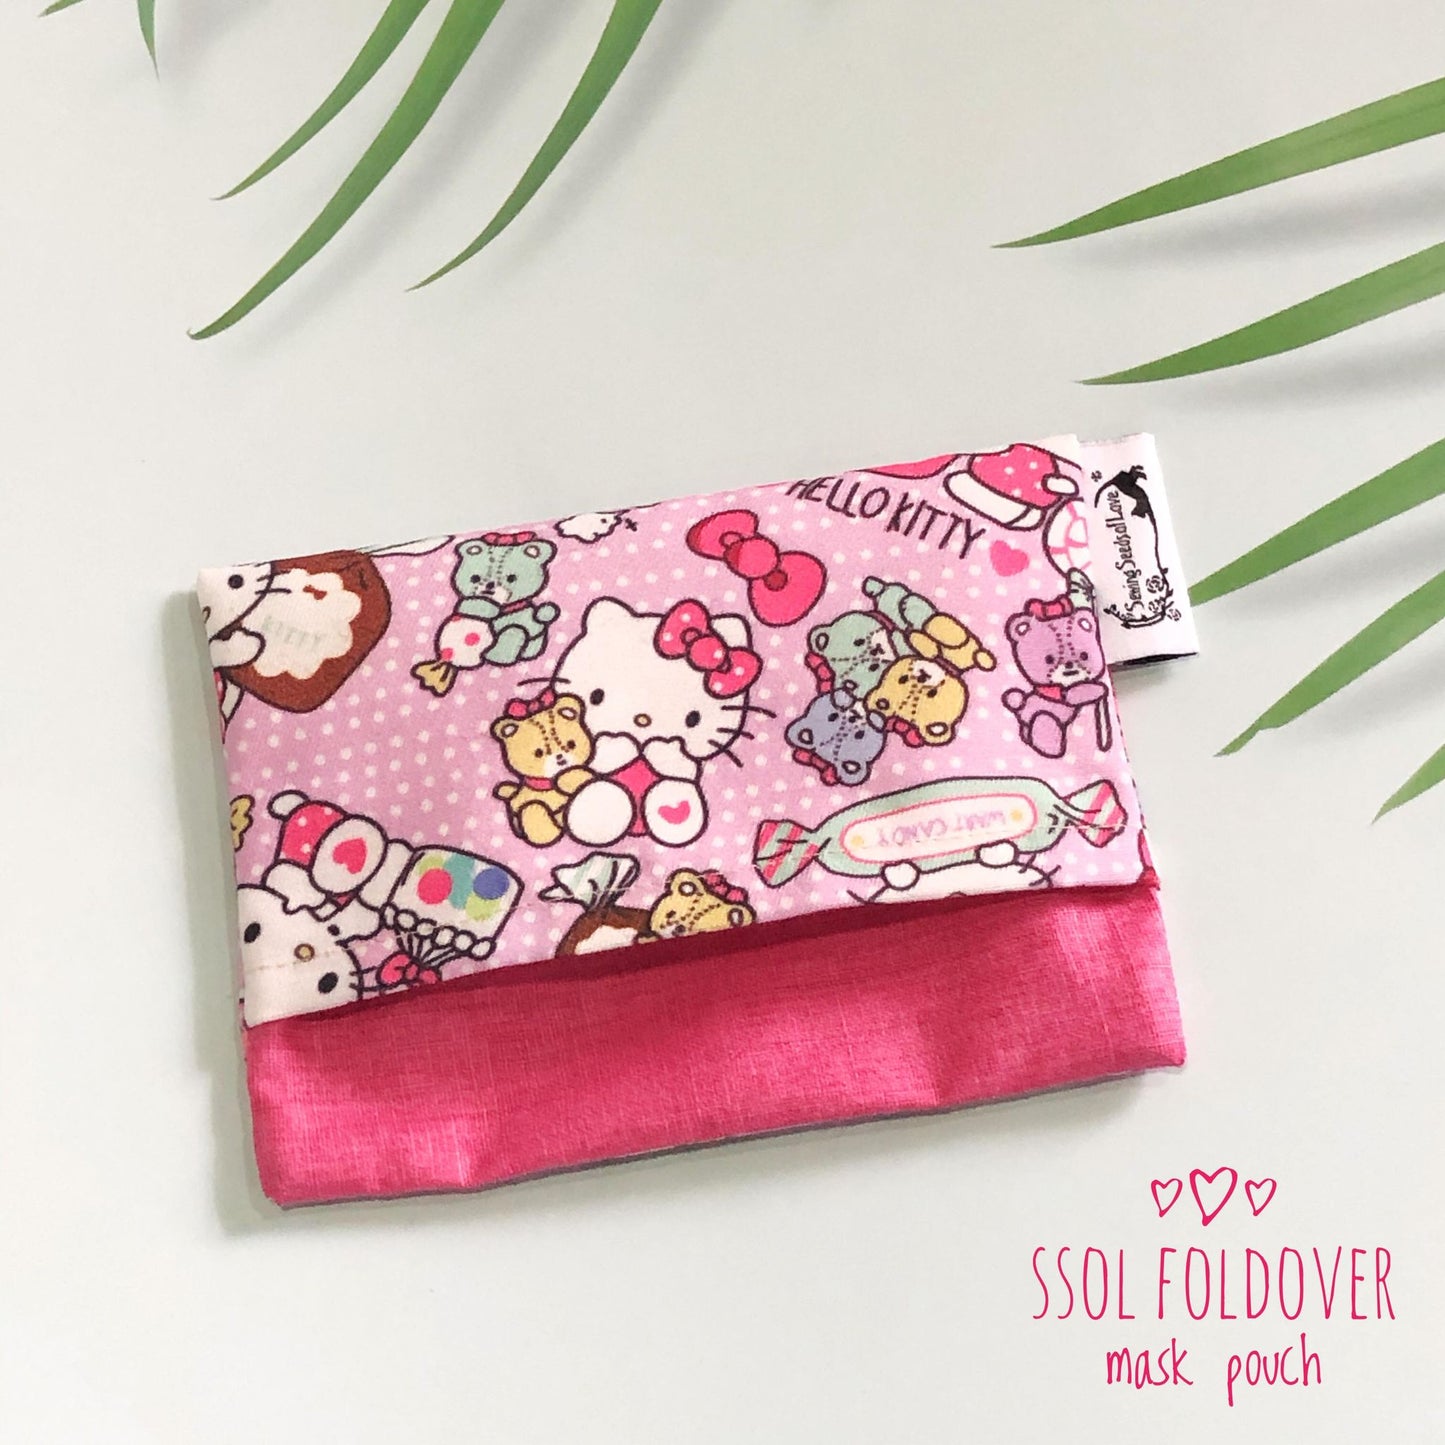 SSOL Foldover Mask Pouch (FREE!)